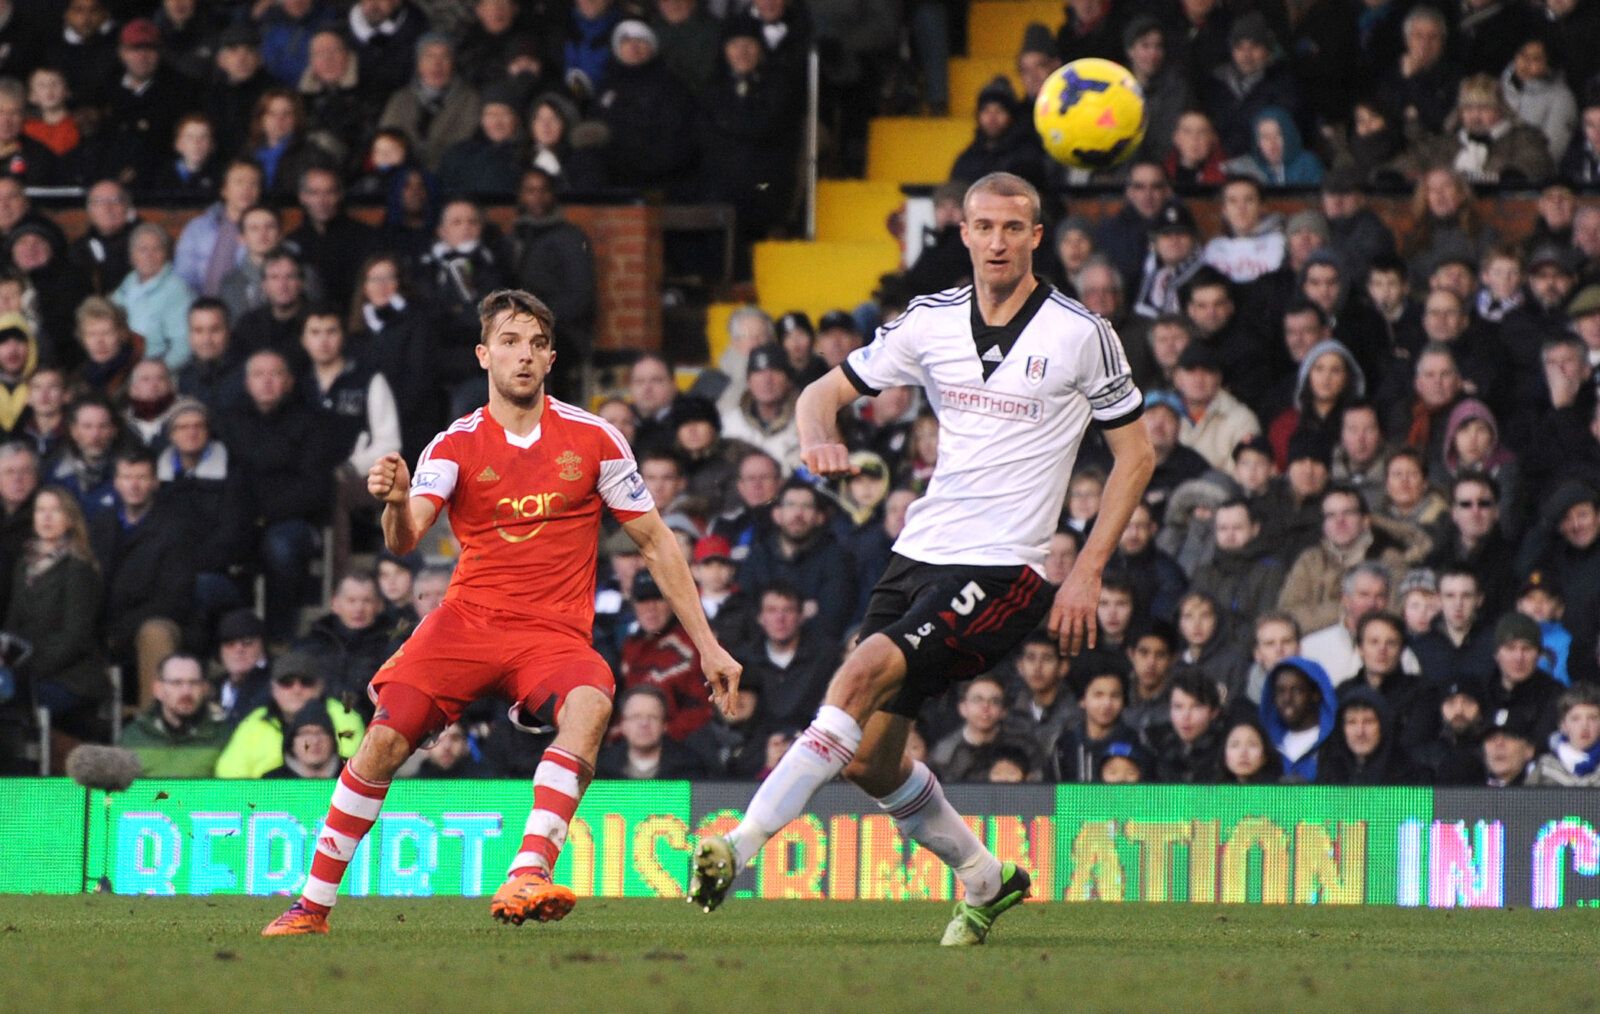 Football - Fulham v Southampton - Barclays Premier League - Craven Cottage - 1/2/14 
Southampton's Jay Rodriguez (L) scores their third goal as Fulham's Brede Hangeland looks on 
Mandatory Credit: Action Images / Tony O'Brien 
Livepic 
EDITORIAL USE ONLY. No use with unauthorized audio, video, data, fixture lists, club/league logos or live services. Online in-match use limited to 45 images, no video emulation. No use in betting, games or single club/league/player publications.  Please contact yo